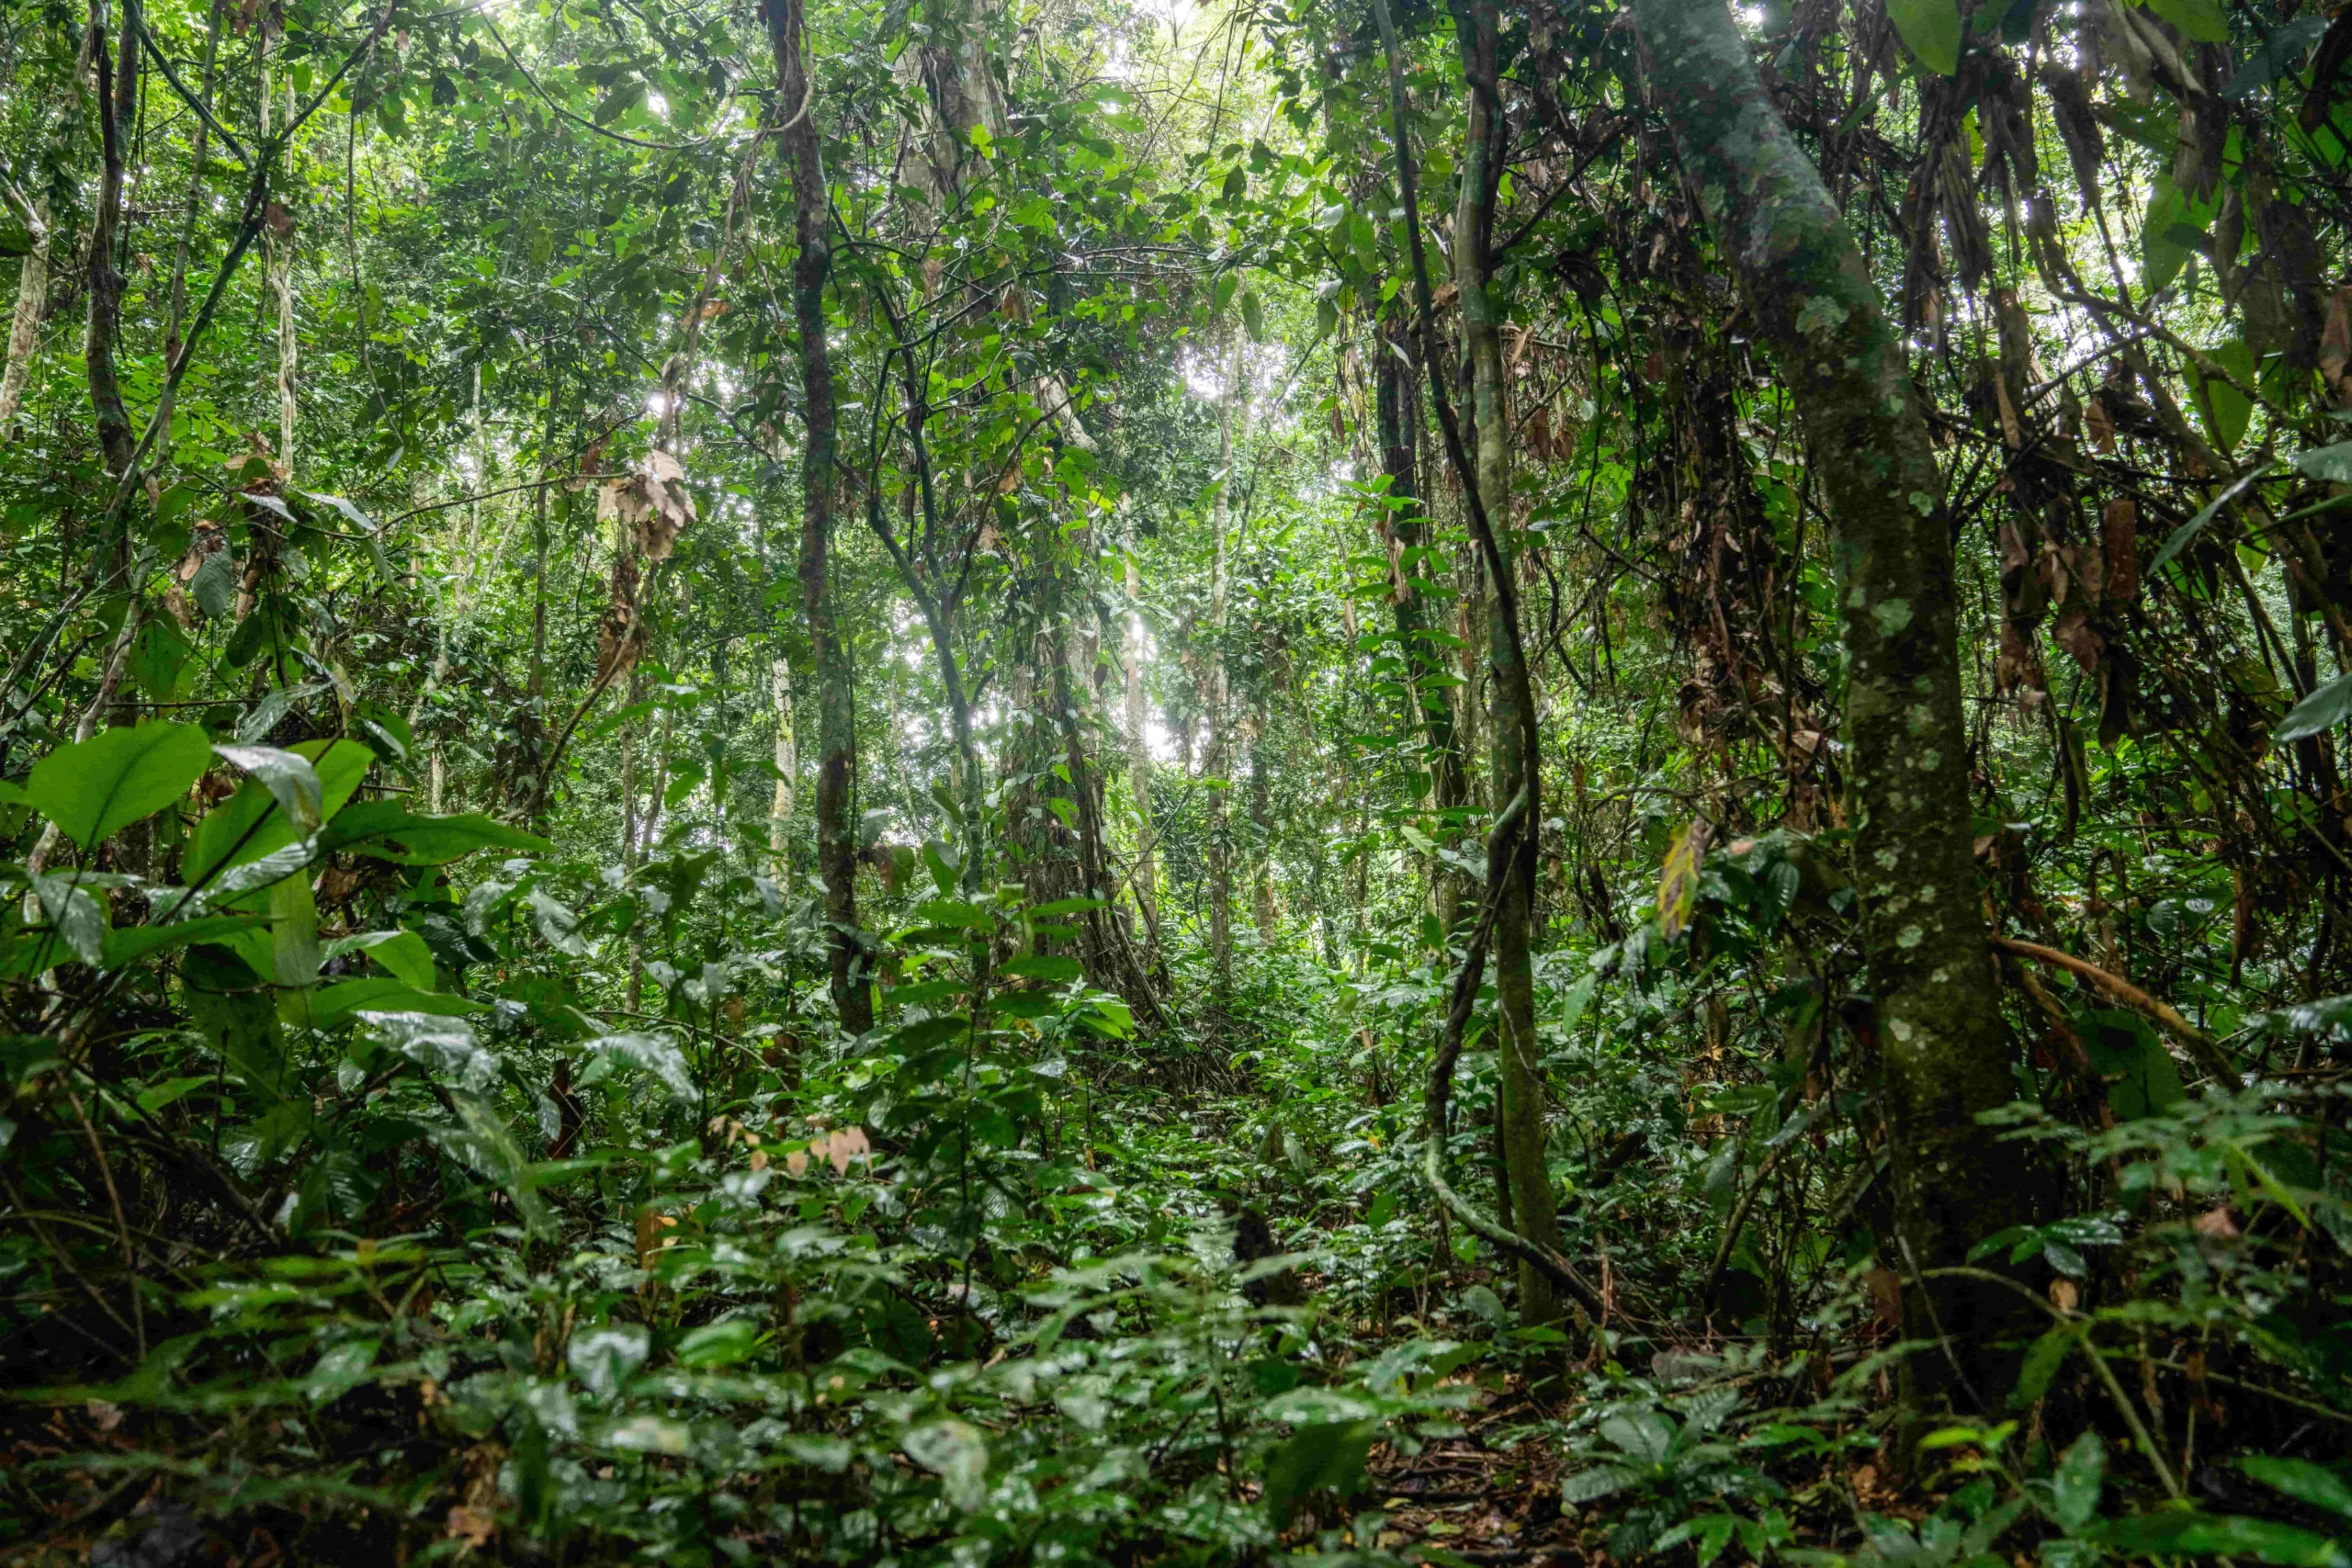 ></noscript>300,000 hectares of forest protected